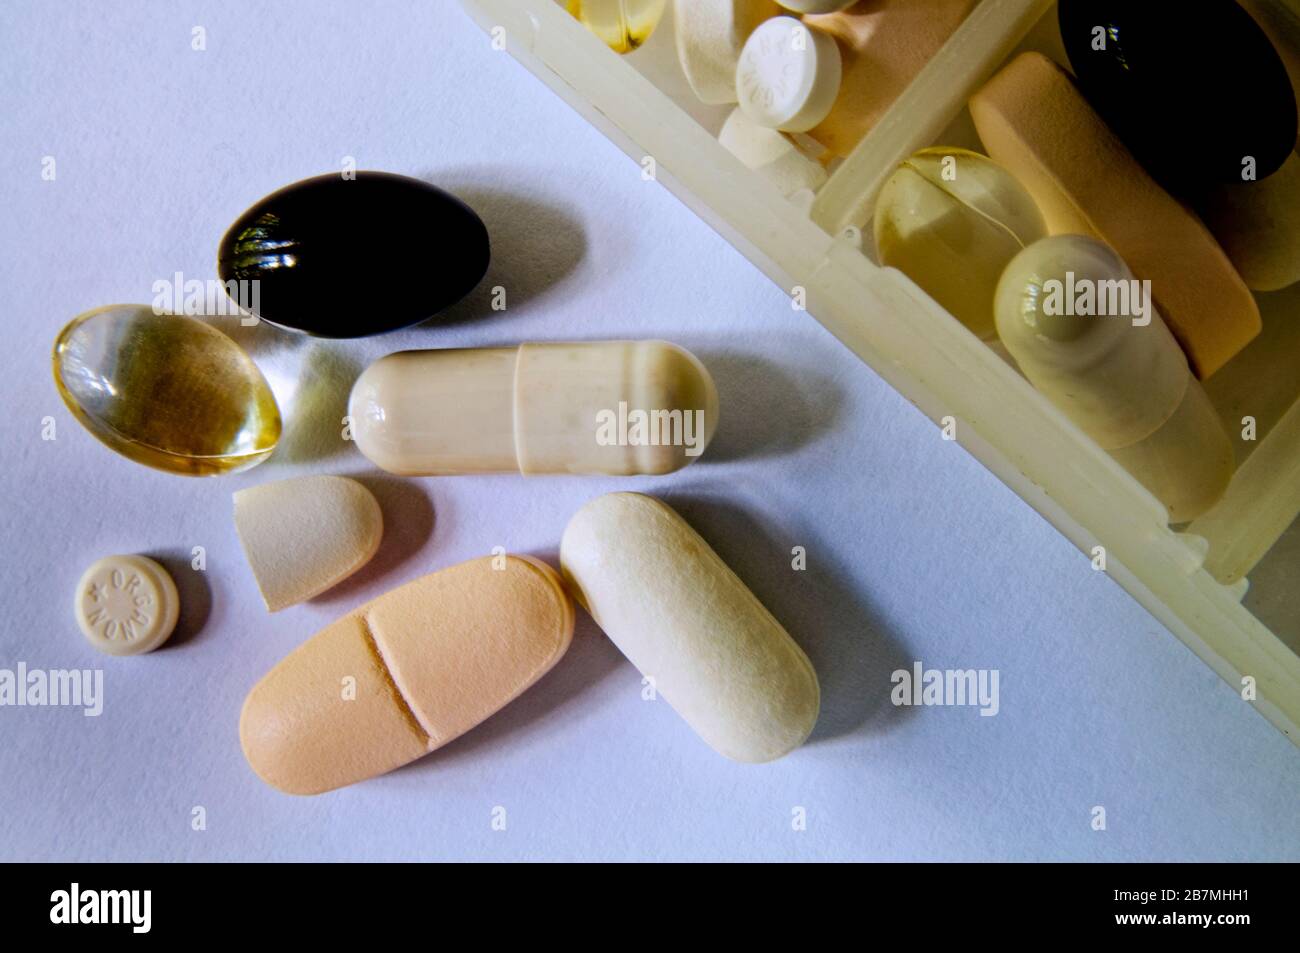 Vitamins, medications and supplements help keep the doctor away. Stock Photo